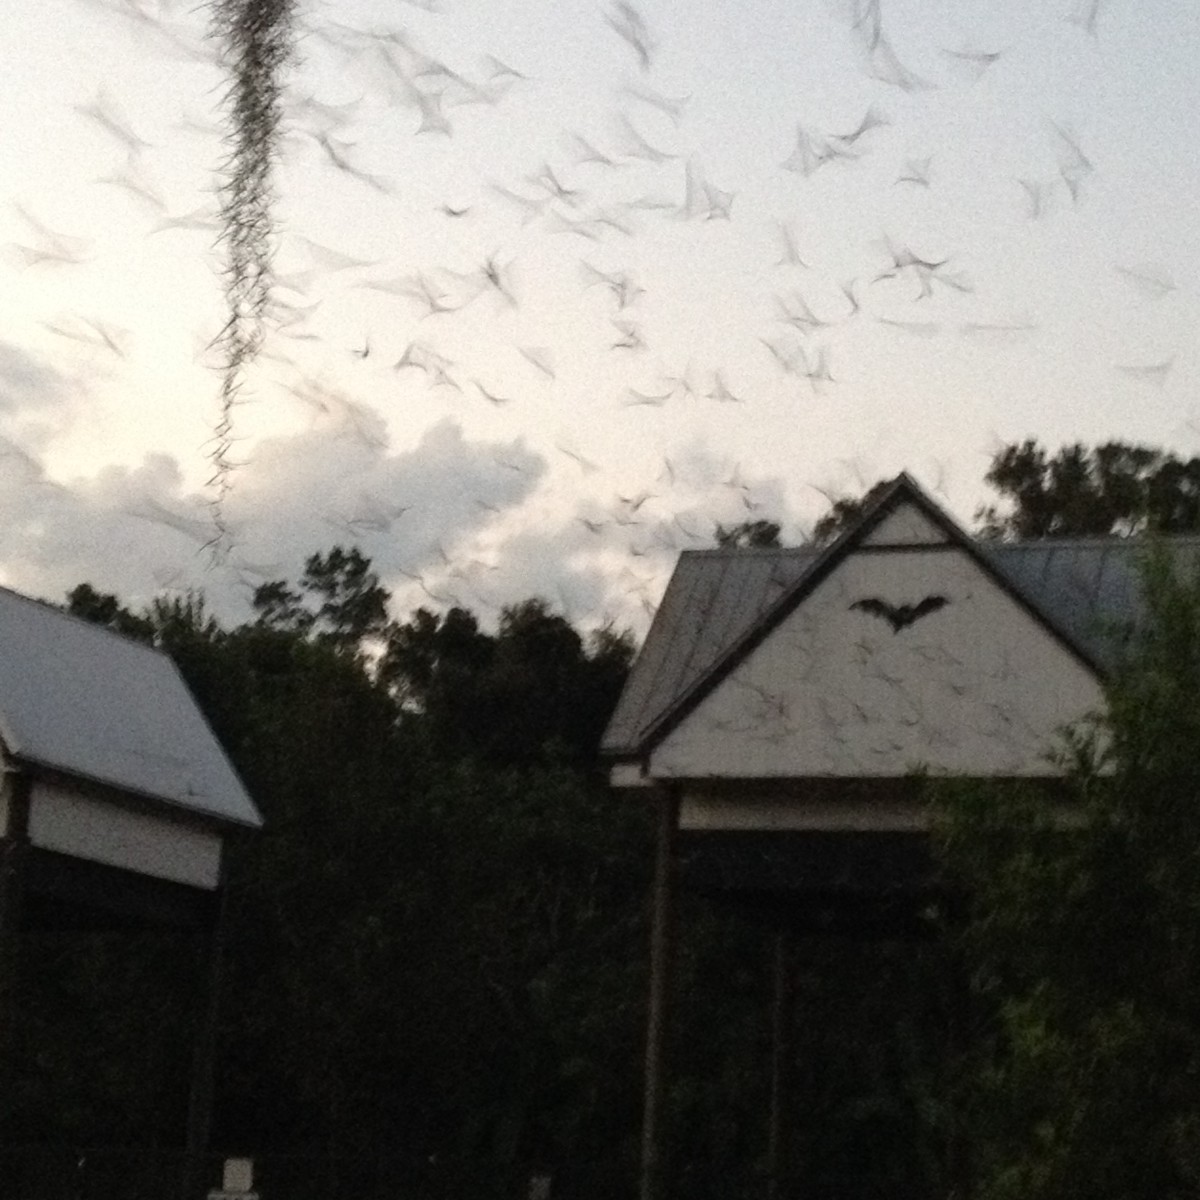 The bats emerging at dusk.  It is a spectacular site and well worth experiencing if you are ever in the Gainesville area.  There is normally a small crowd there most nights, people of all ages and backgrounds.